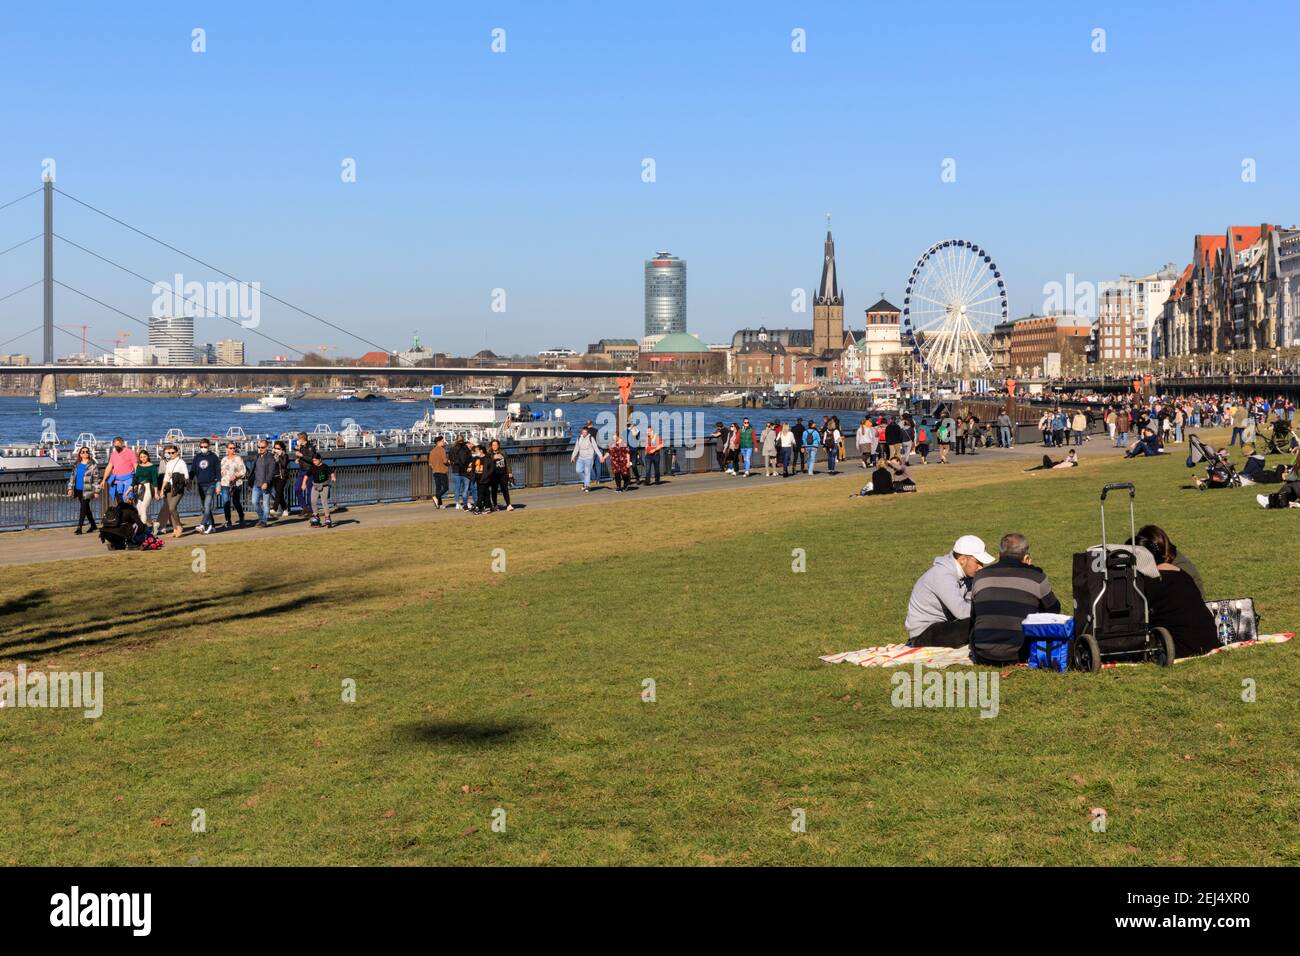 Düsseldorf, NRW, 2021. People enjoy their Sunday afternoon in beautiful warm sunshine with temperatures up to 18 degrees, strolling along the River Rhine in Düsseldorf, the capital of Germany's most populous state of North Rhine-Westphalia. Credit: Imageplotter/Alamy Live News Stock Photo